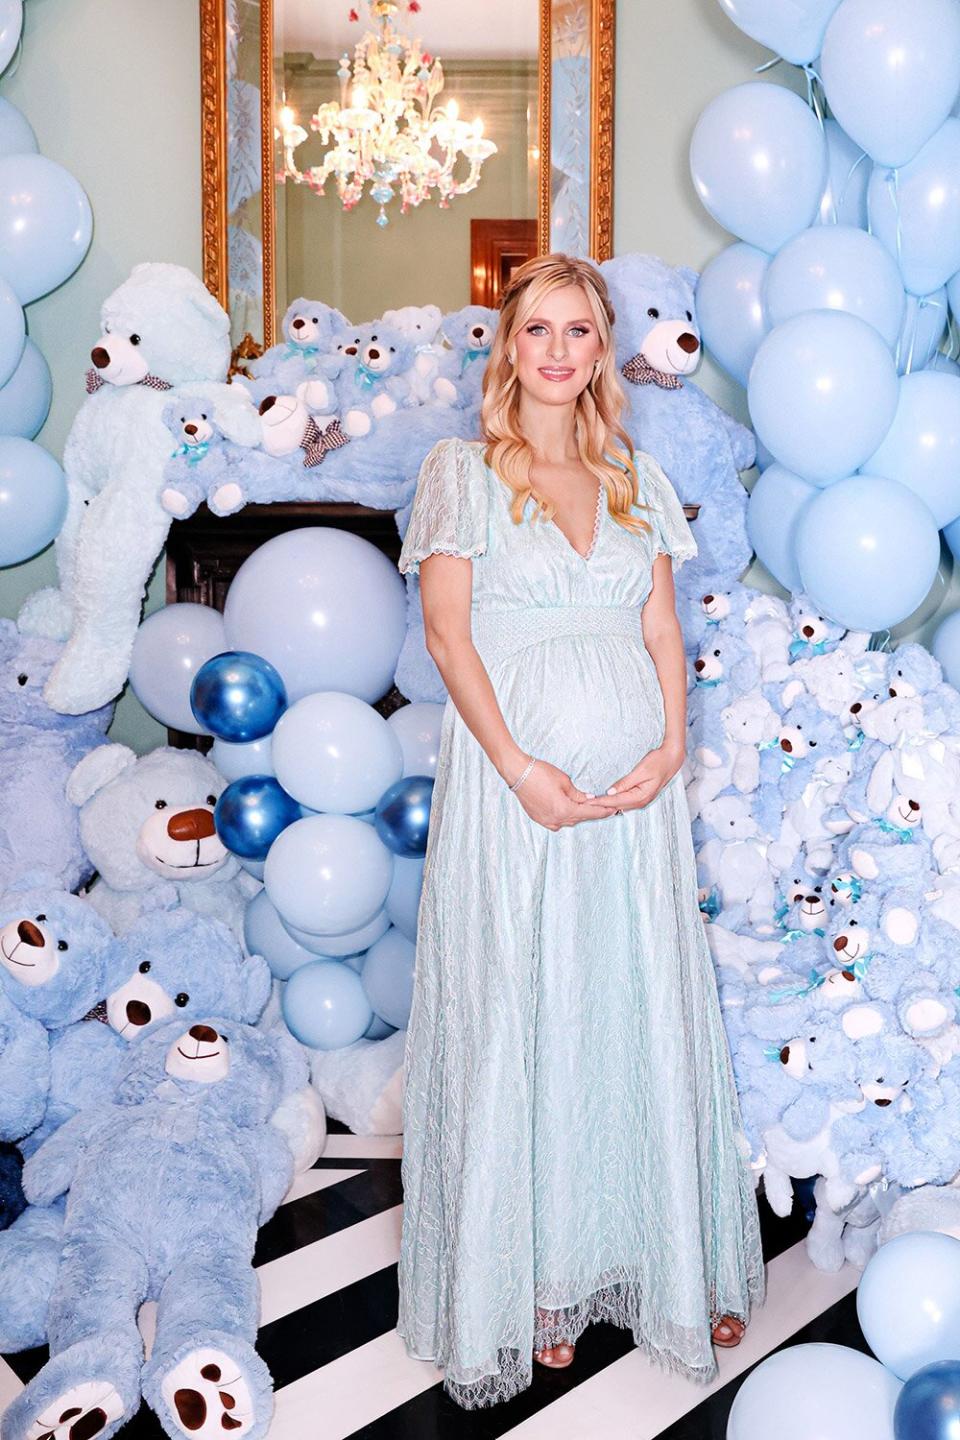 Stacey Bendet hosted a baby shower for Nicky Hilton on Friday, May 6th in at a private residence in Manhattan.